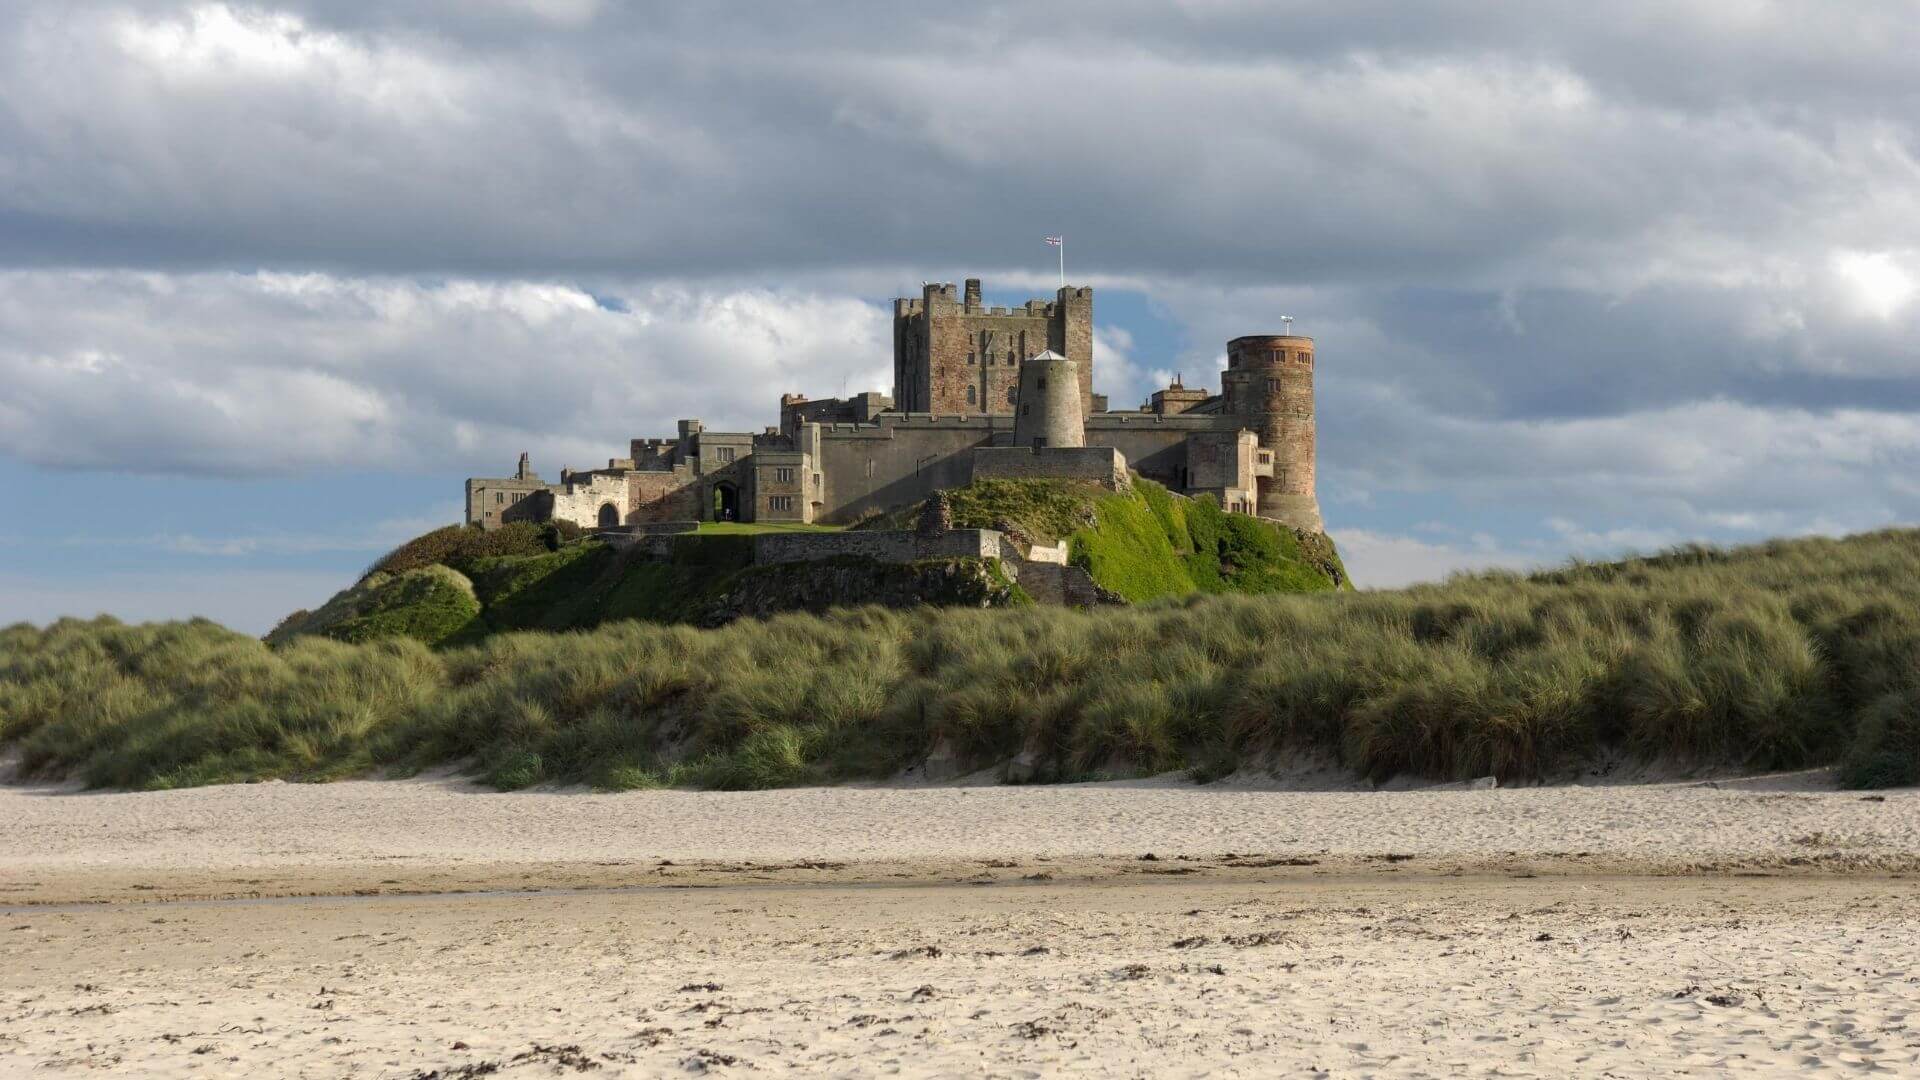 7 Most Popular Beaches in England for a Day Out